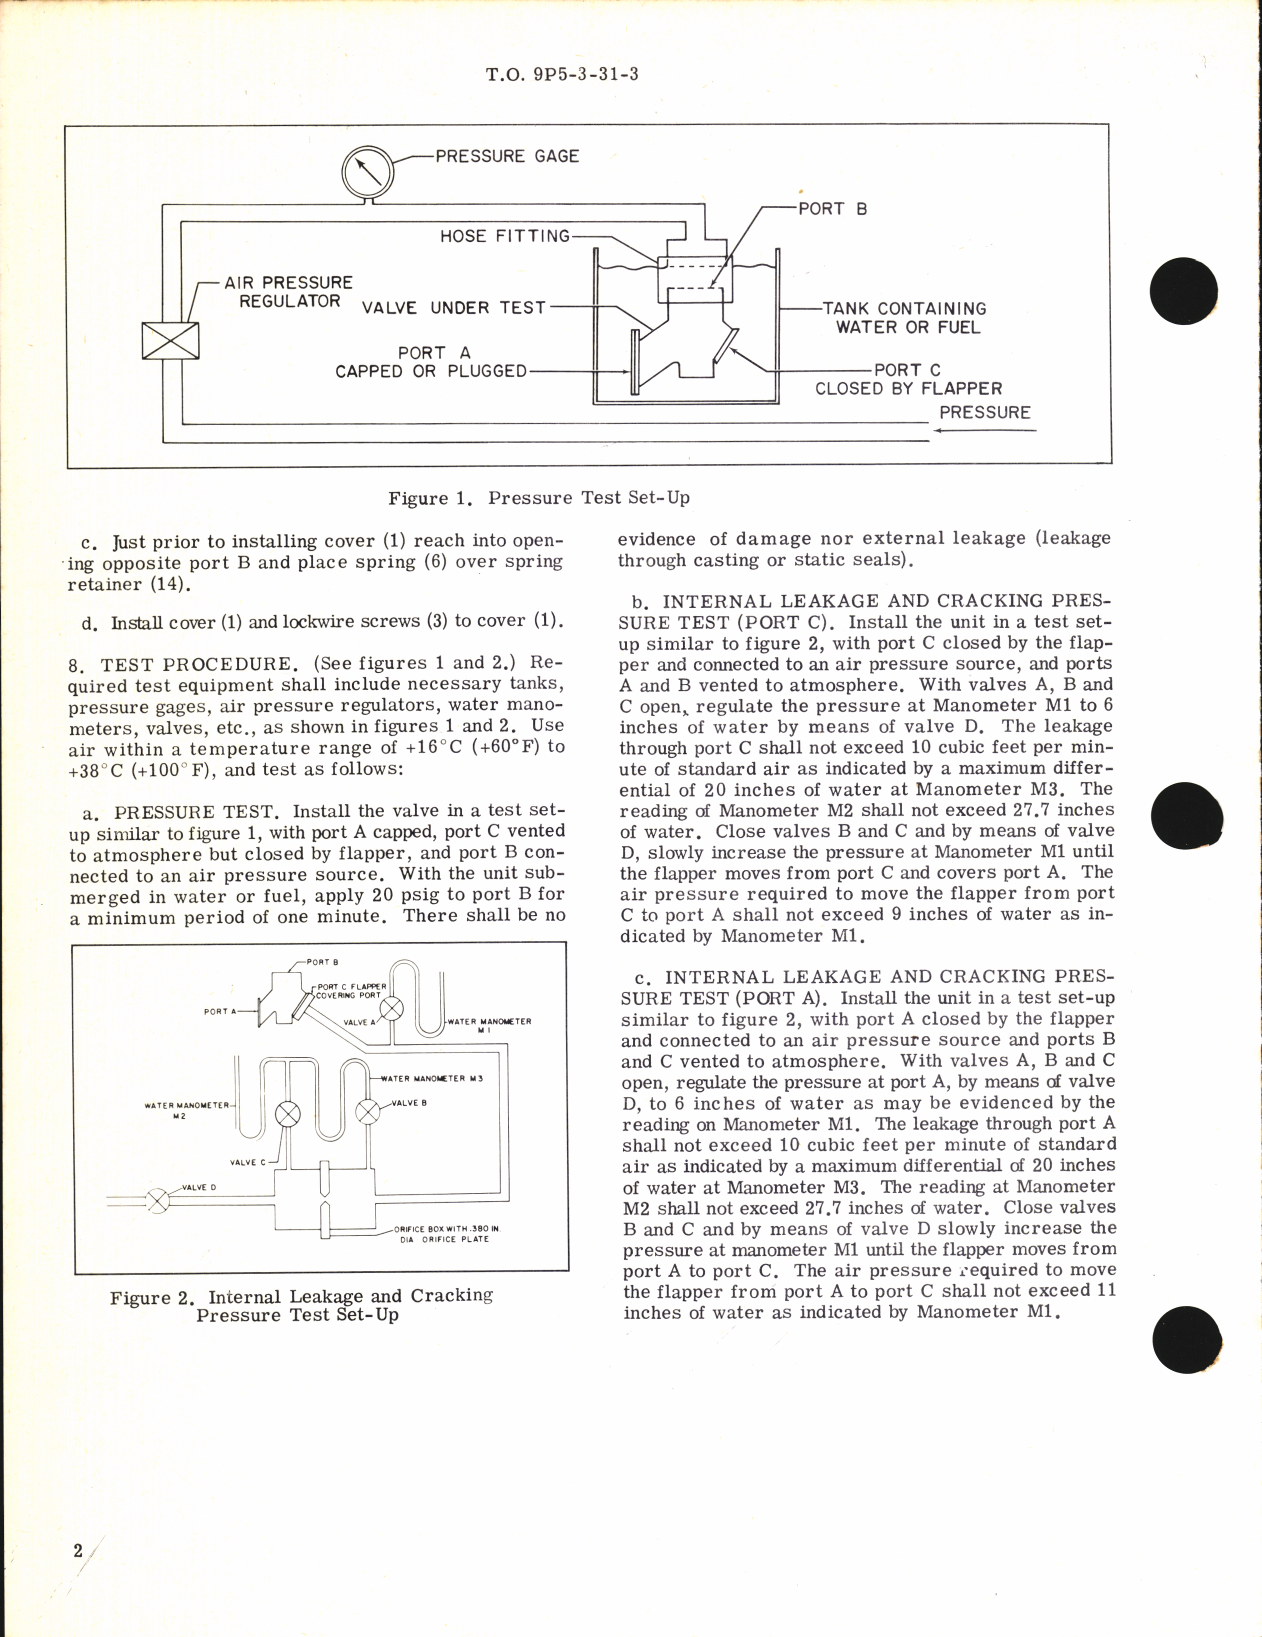 Sample page 2 from AirCorps Library document: Overhaul Instructions with Parts Breakdown for Alternator Cooling control Valve Part No. 5-1253-1